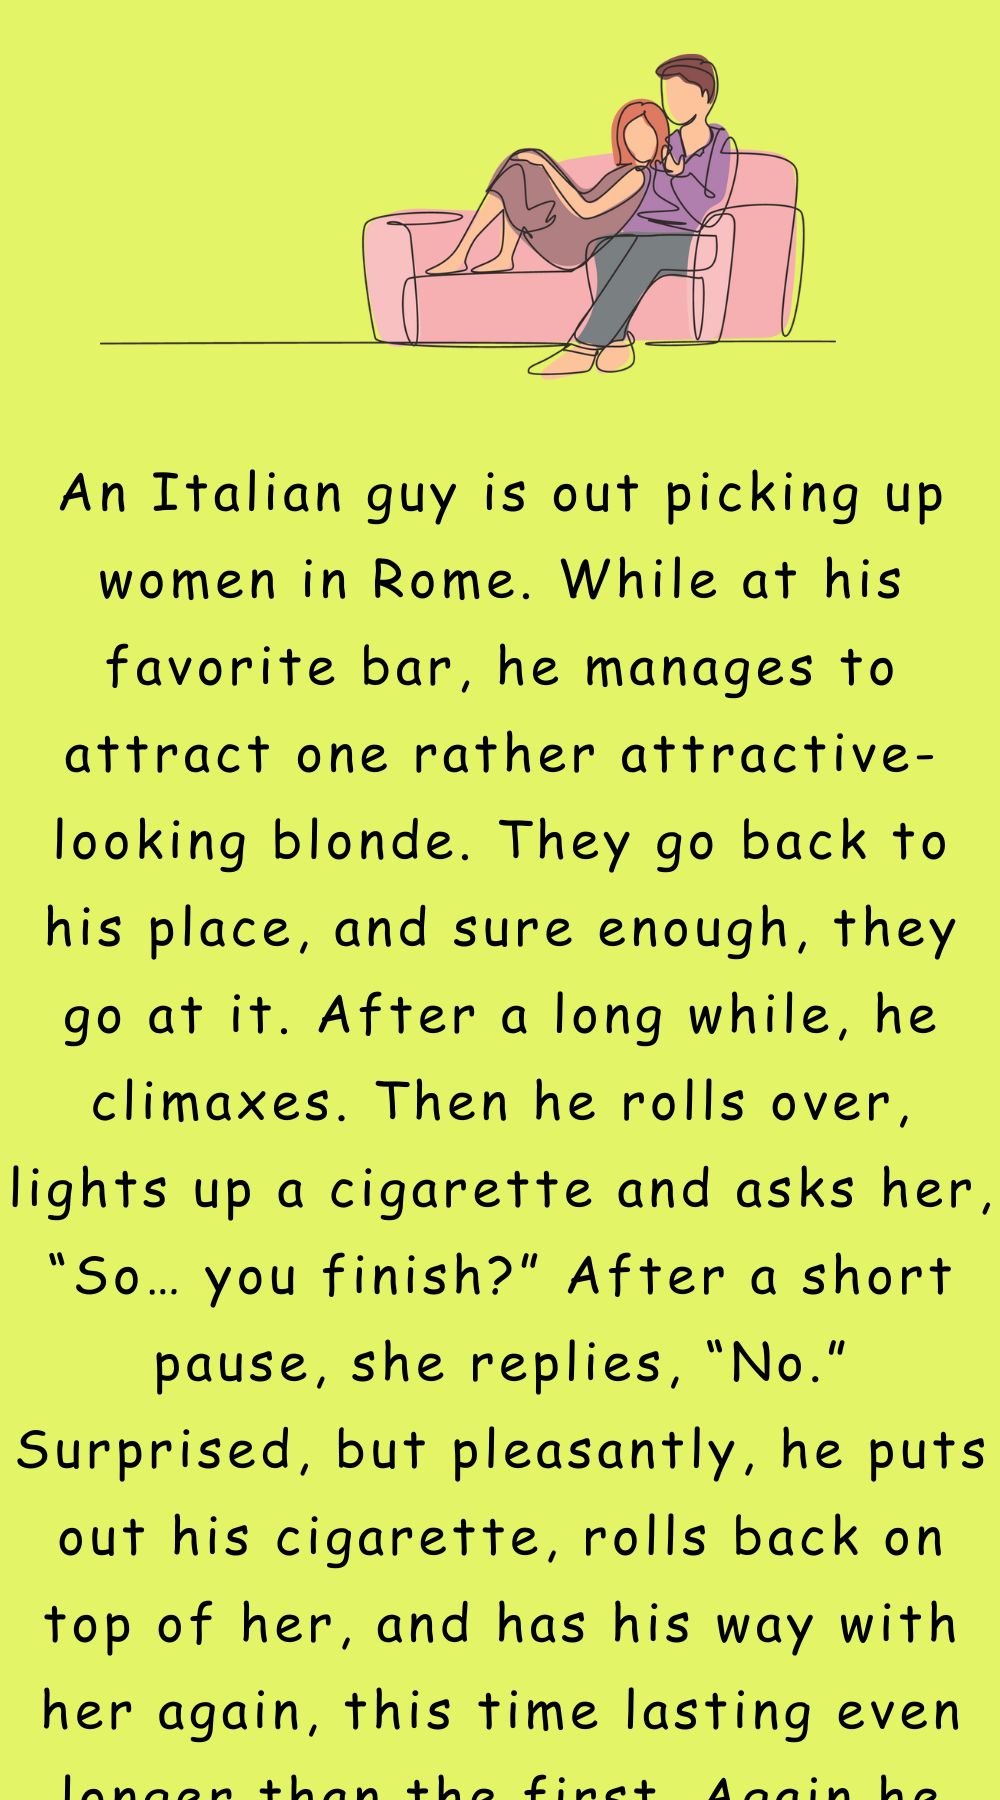 An Italian guy is out picking up women in Rome